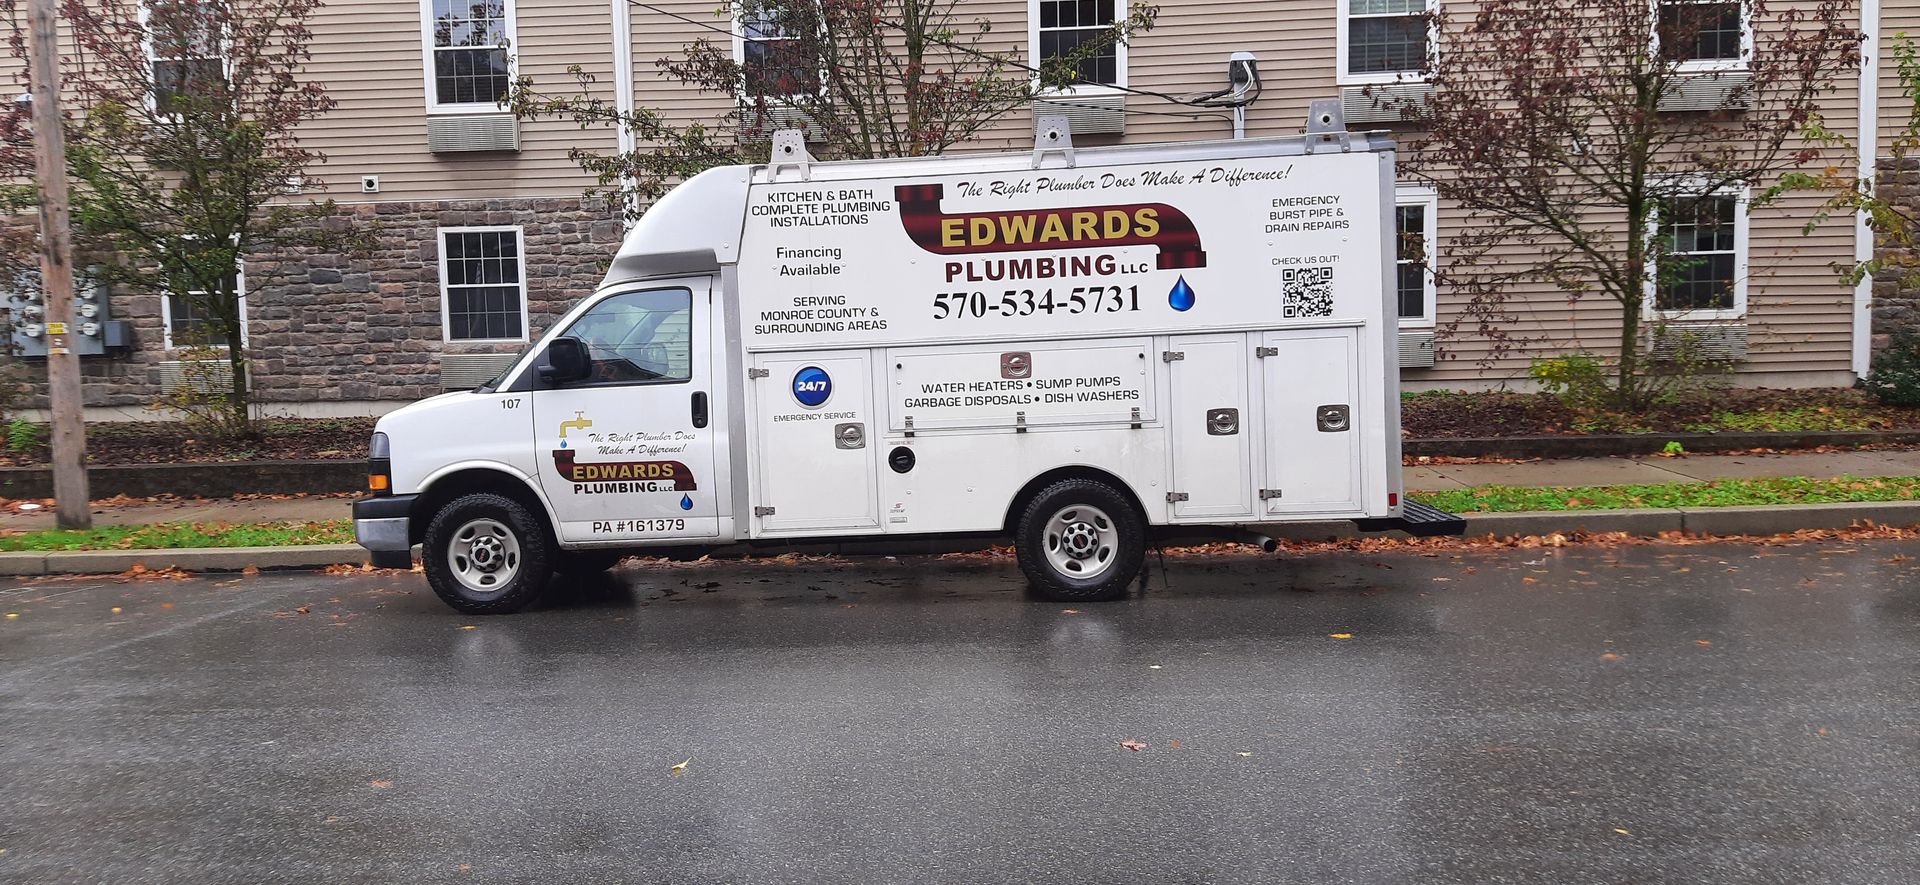 Edwards Plumbing Truck parked on the street in front of building